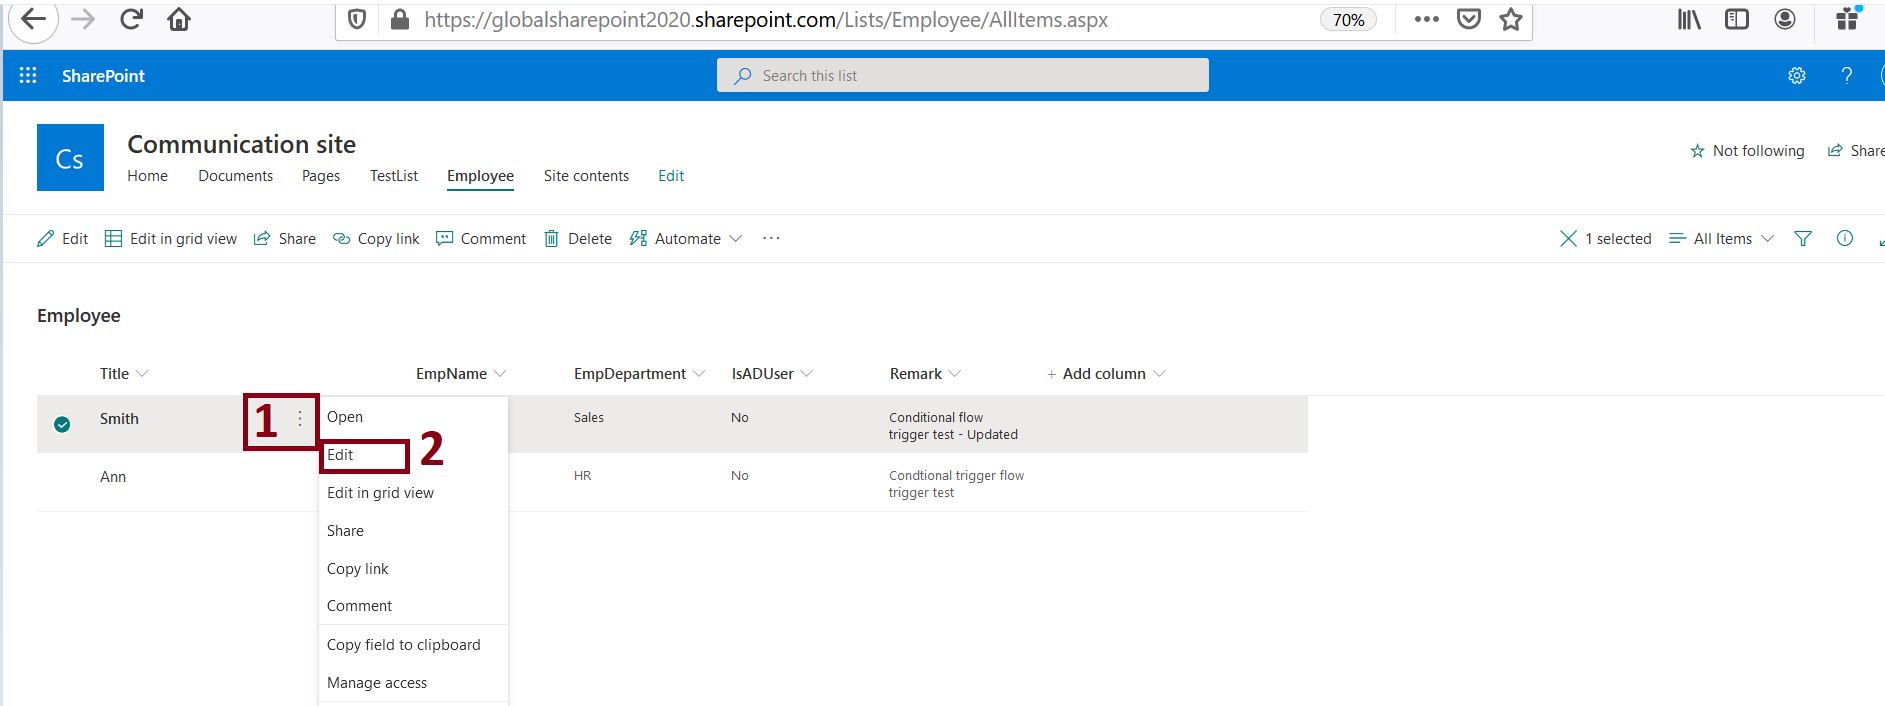 version history in SharePoint Online, track item history comment details in SharePoint Online list